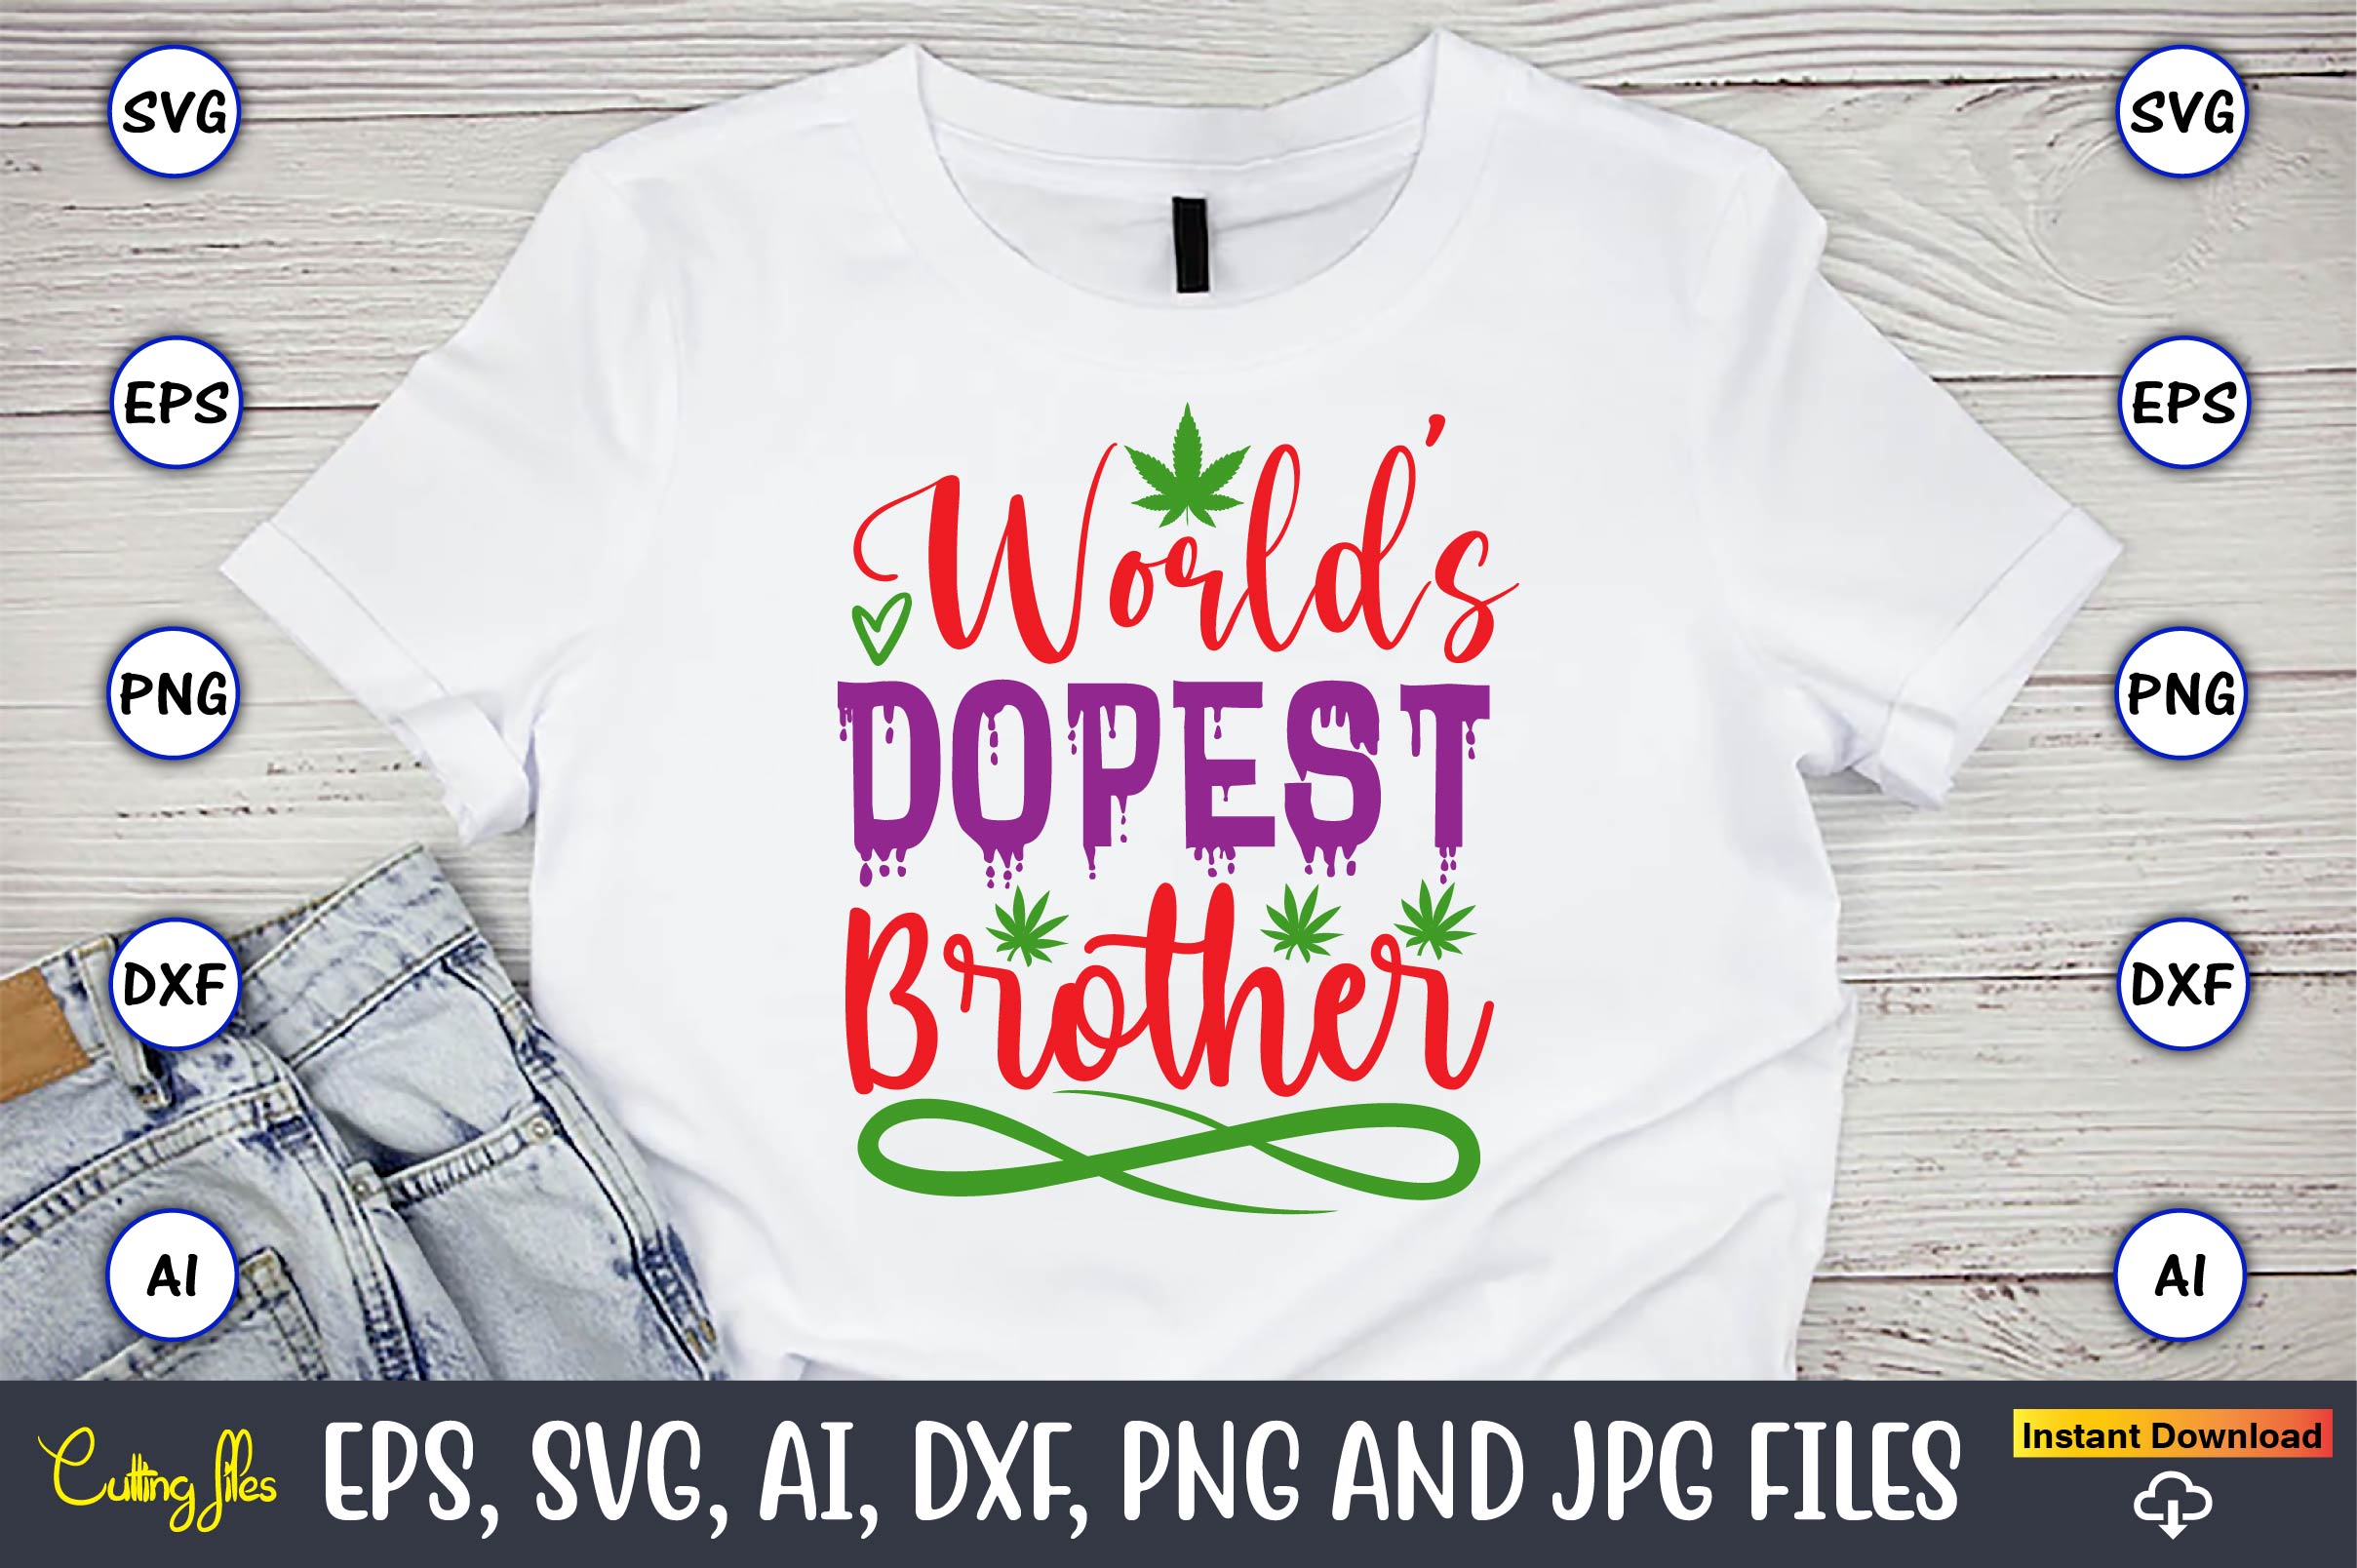 Picture of a white t-shirt with the unique World's dopest brother slogan.